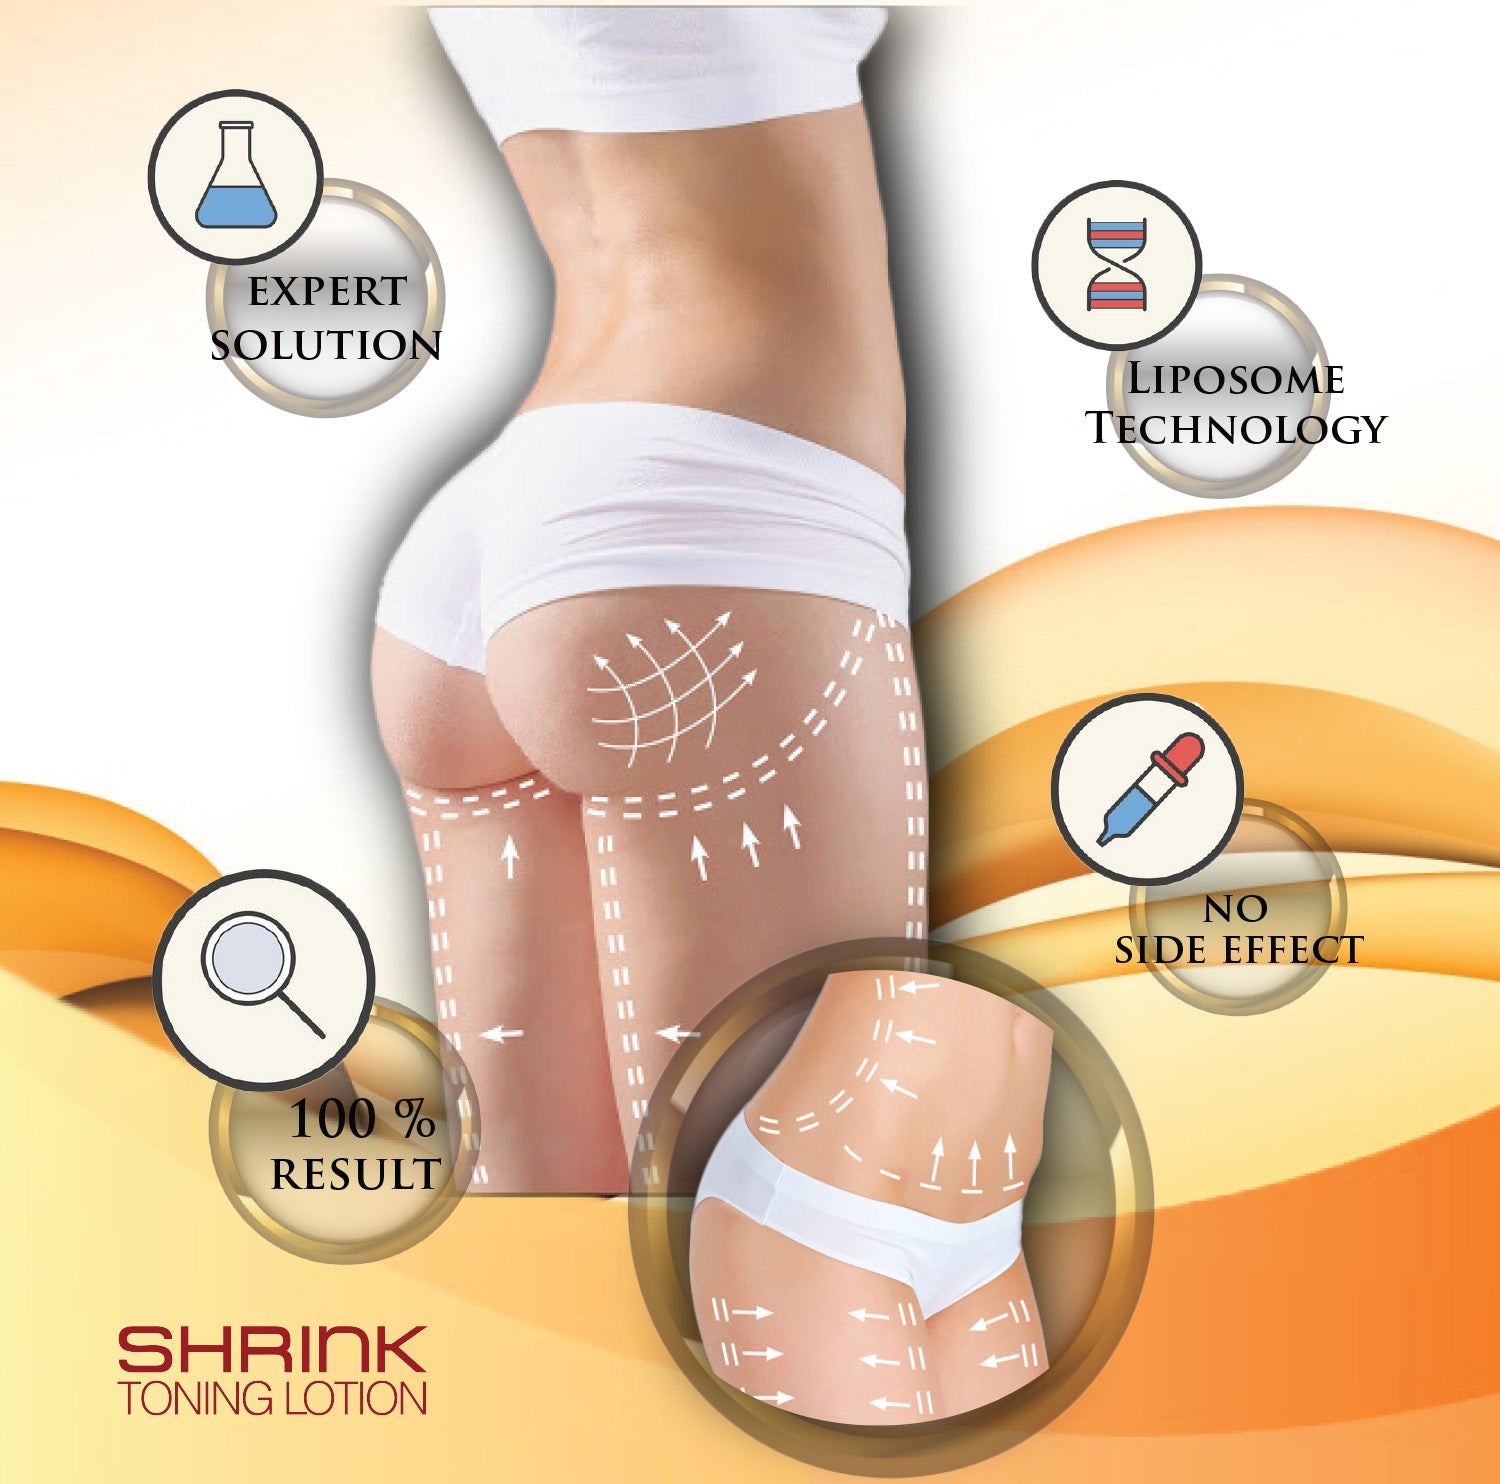 Shrink Toning Lotion - Heat Activated Skin Tightening Cream for Body!